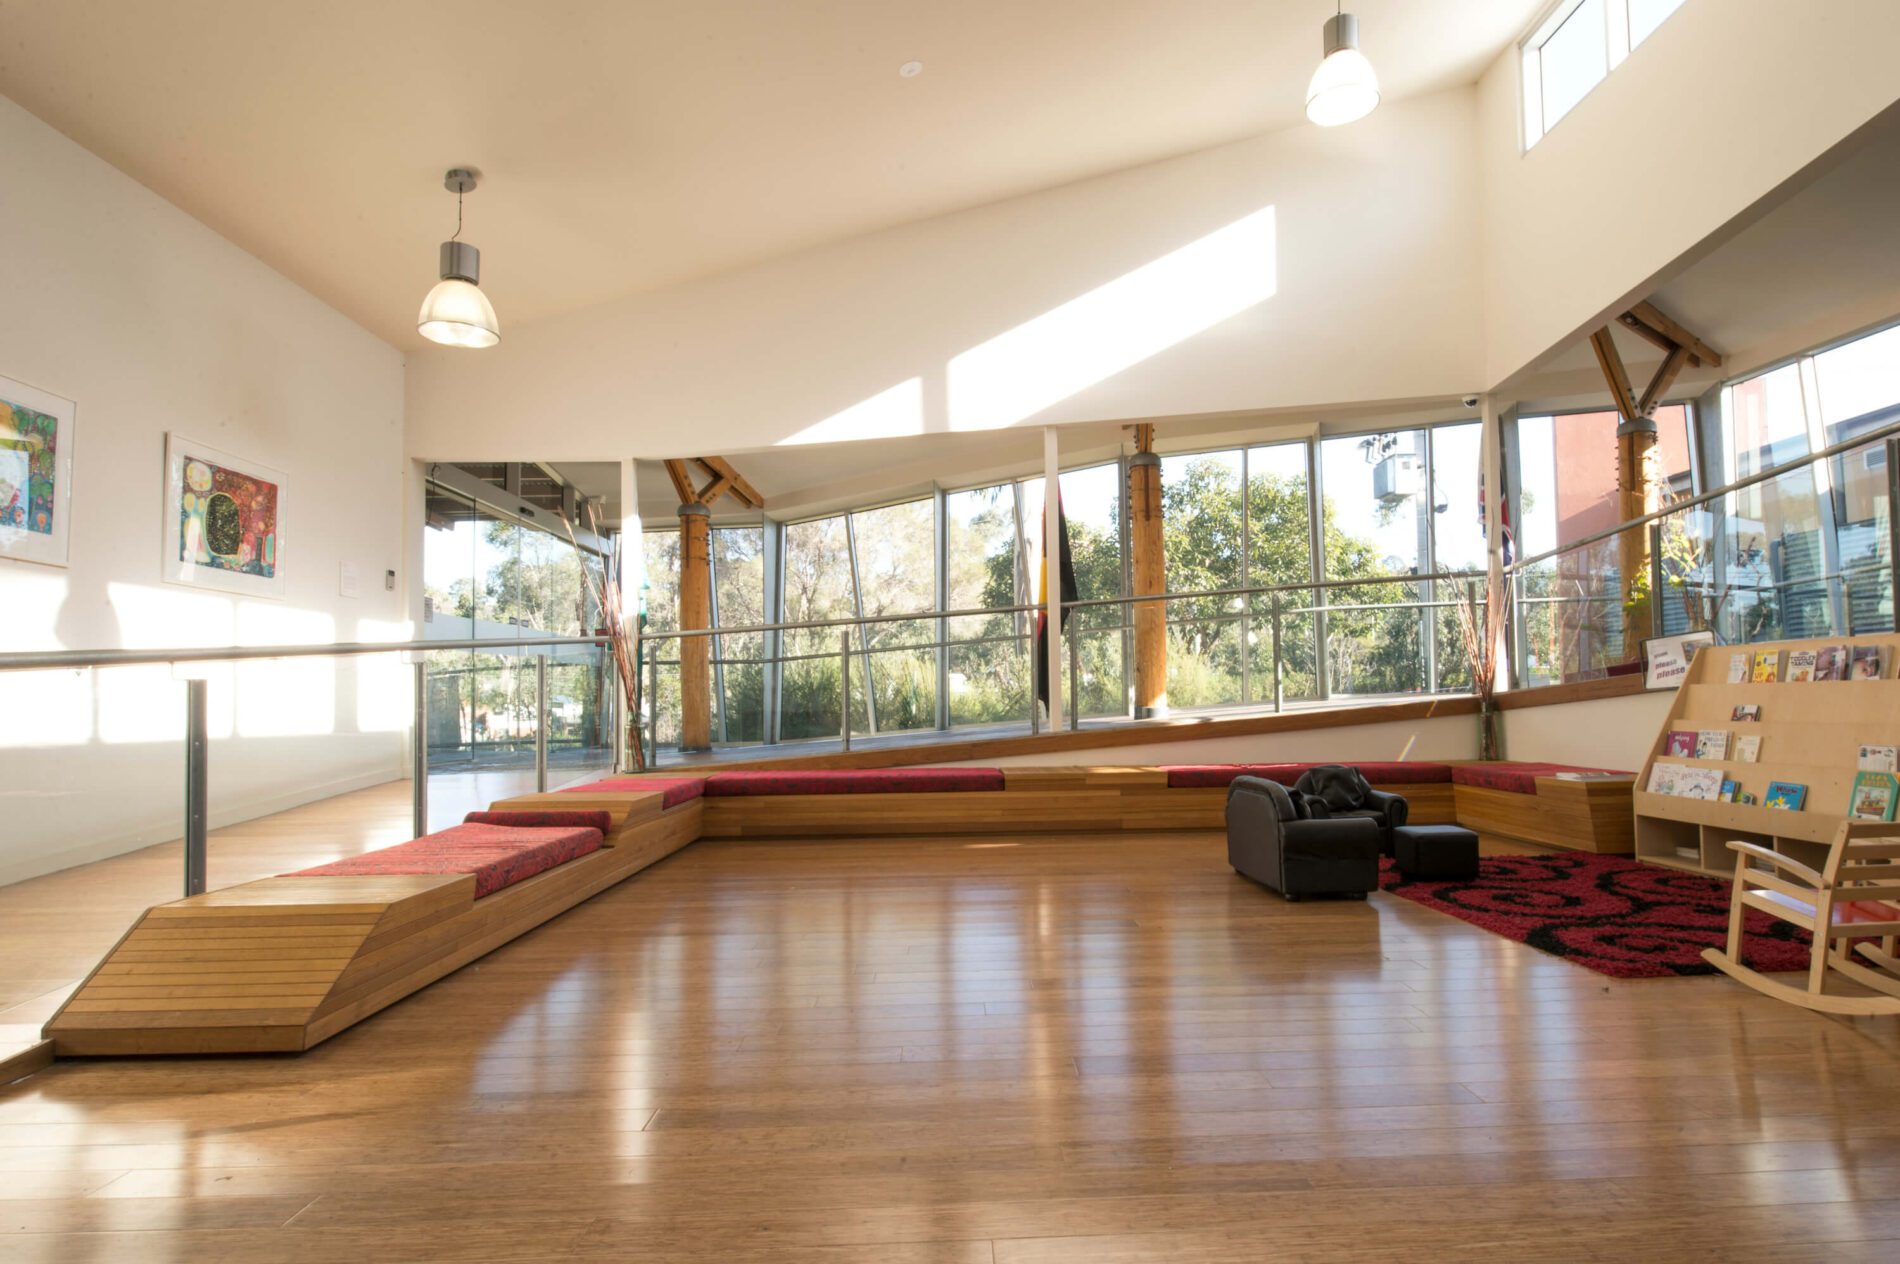 Bright community space with natural light and timber floors